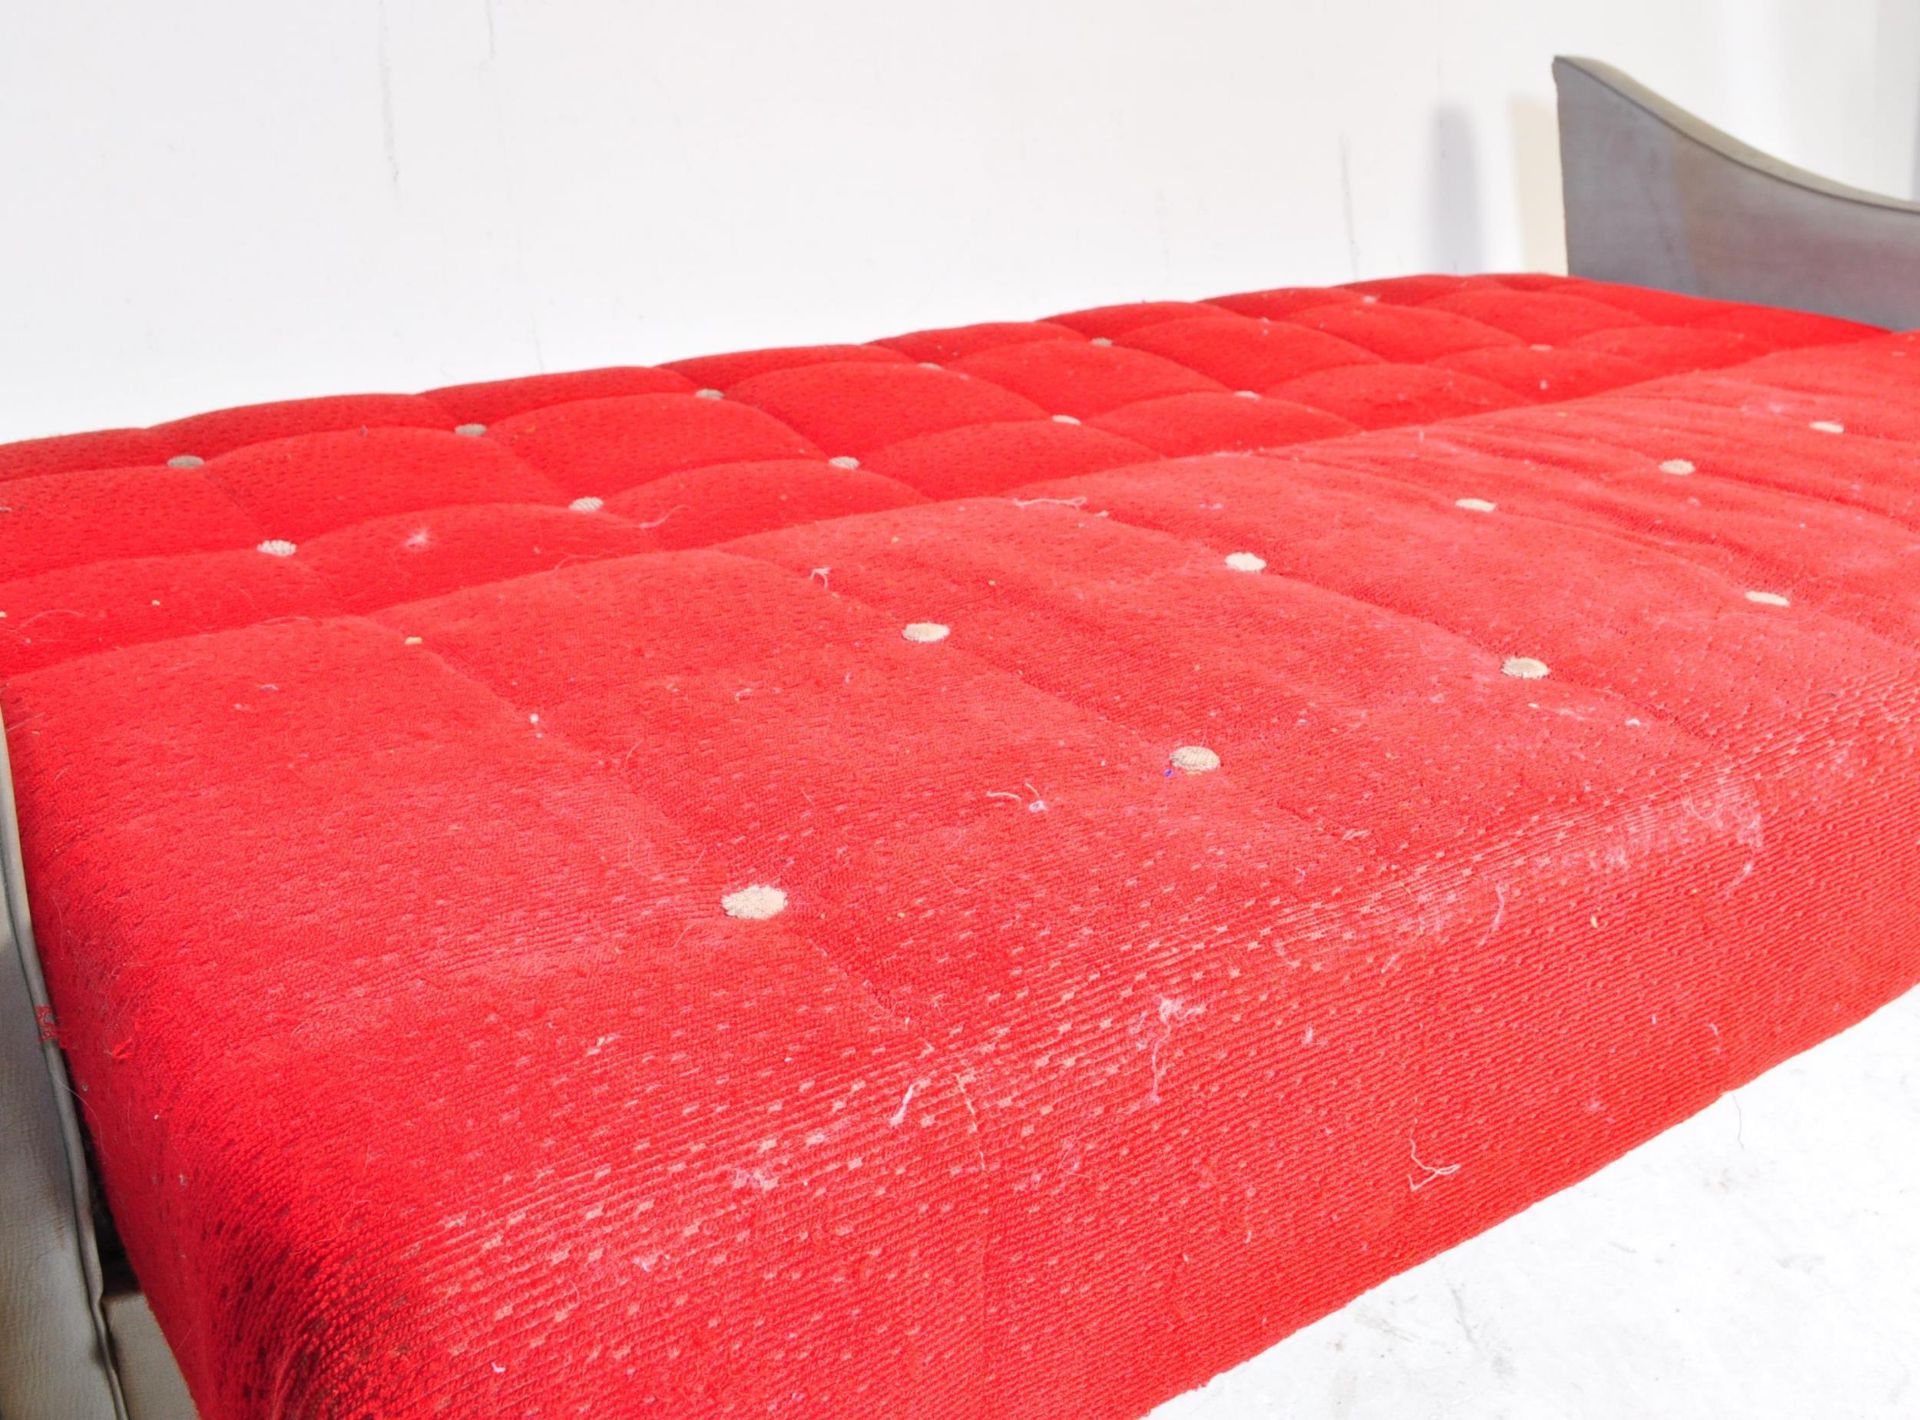 RETRO VINTAGE MID 20TH CENTURY SPACE AGE SOFA DAY BED - Image 5 of 5